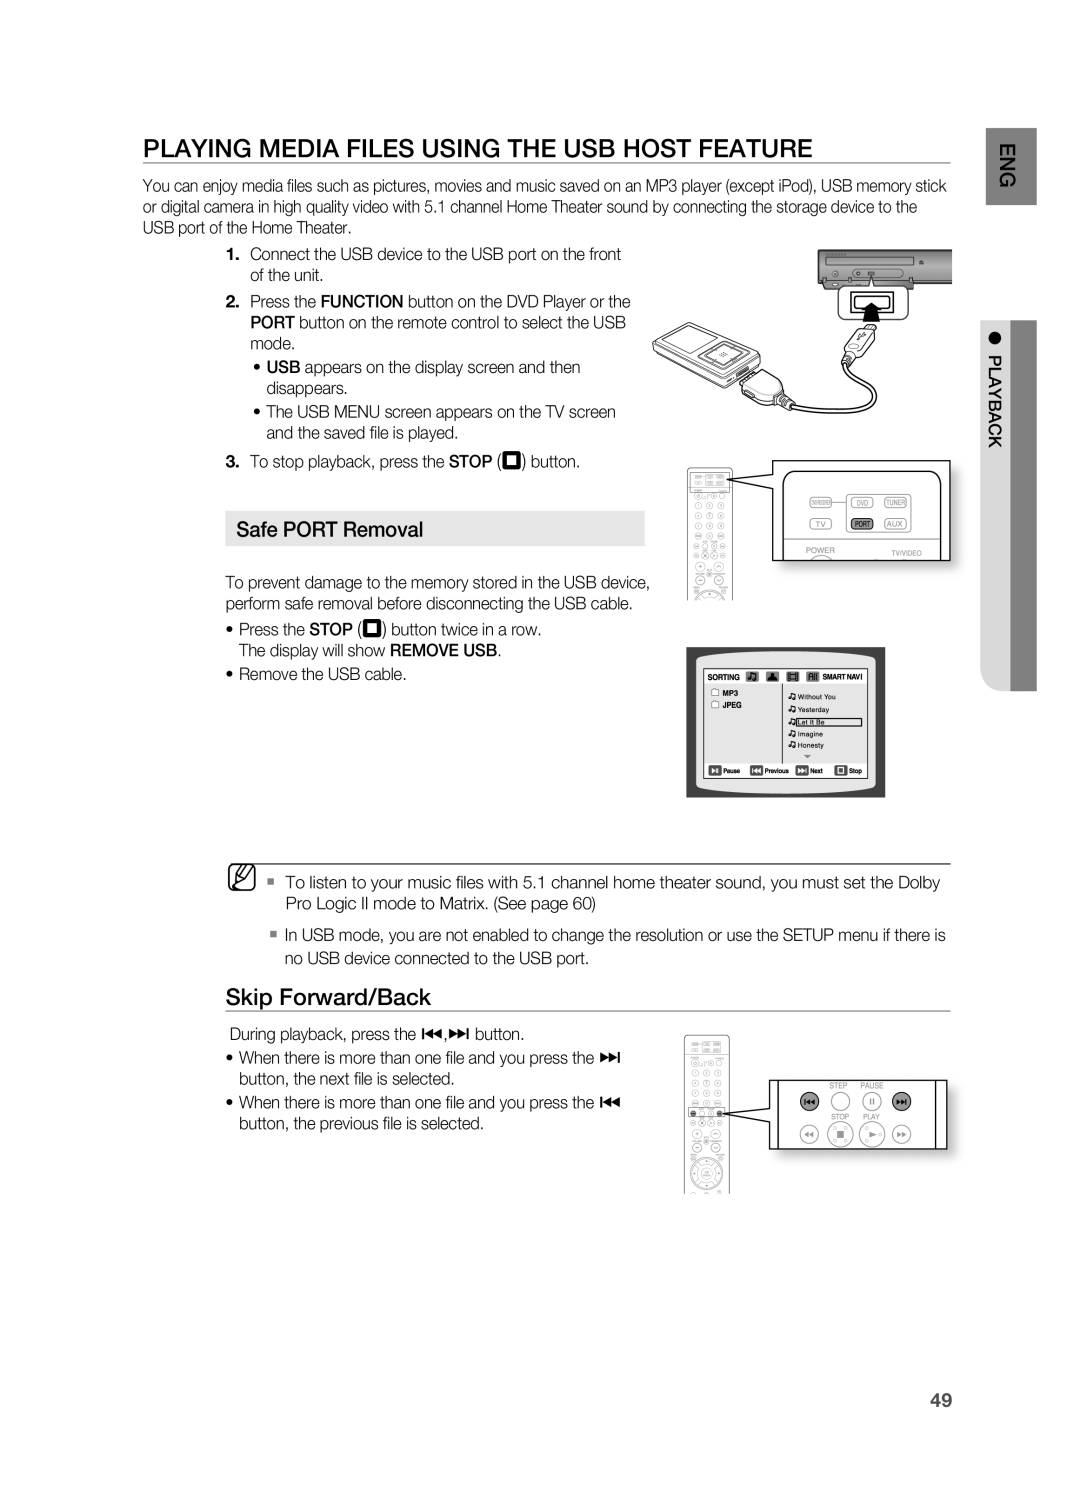 Samsung HT-Z310, HT-TZ312 manual PLayinG mEDia fiLES USinG tHE USB HOSt fEatUrE, Safe POrt removal, Skip forward/Back 